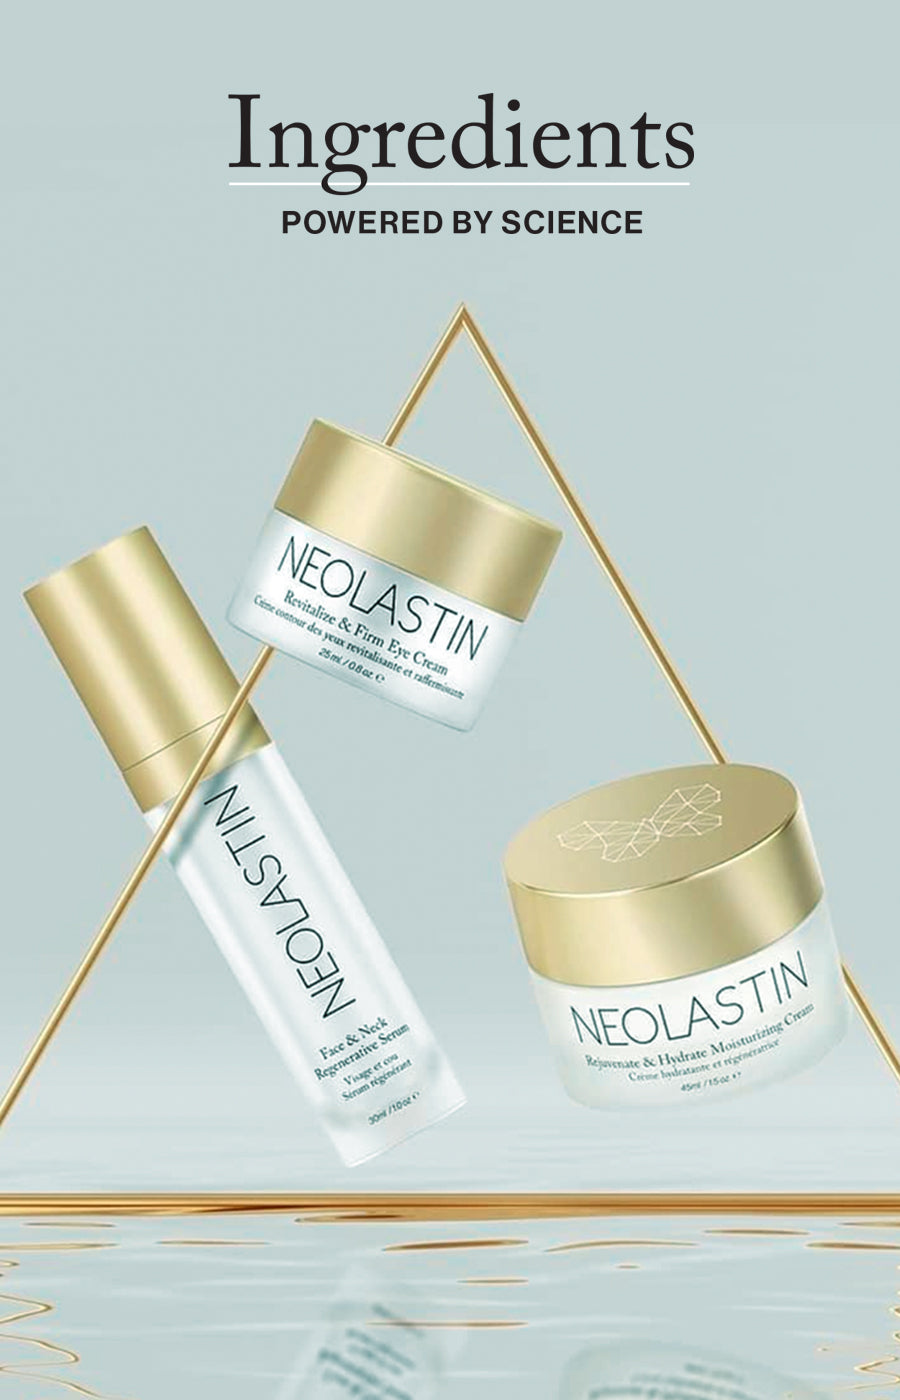 Neolastin-Ingredients-Powered-By-Science